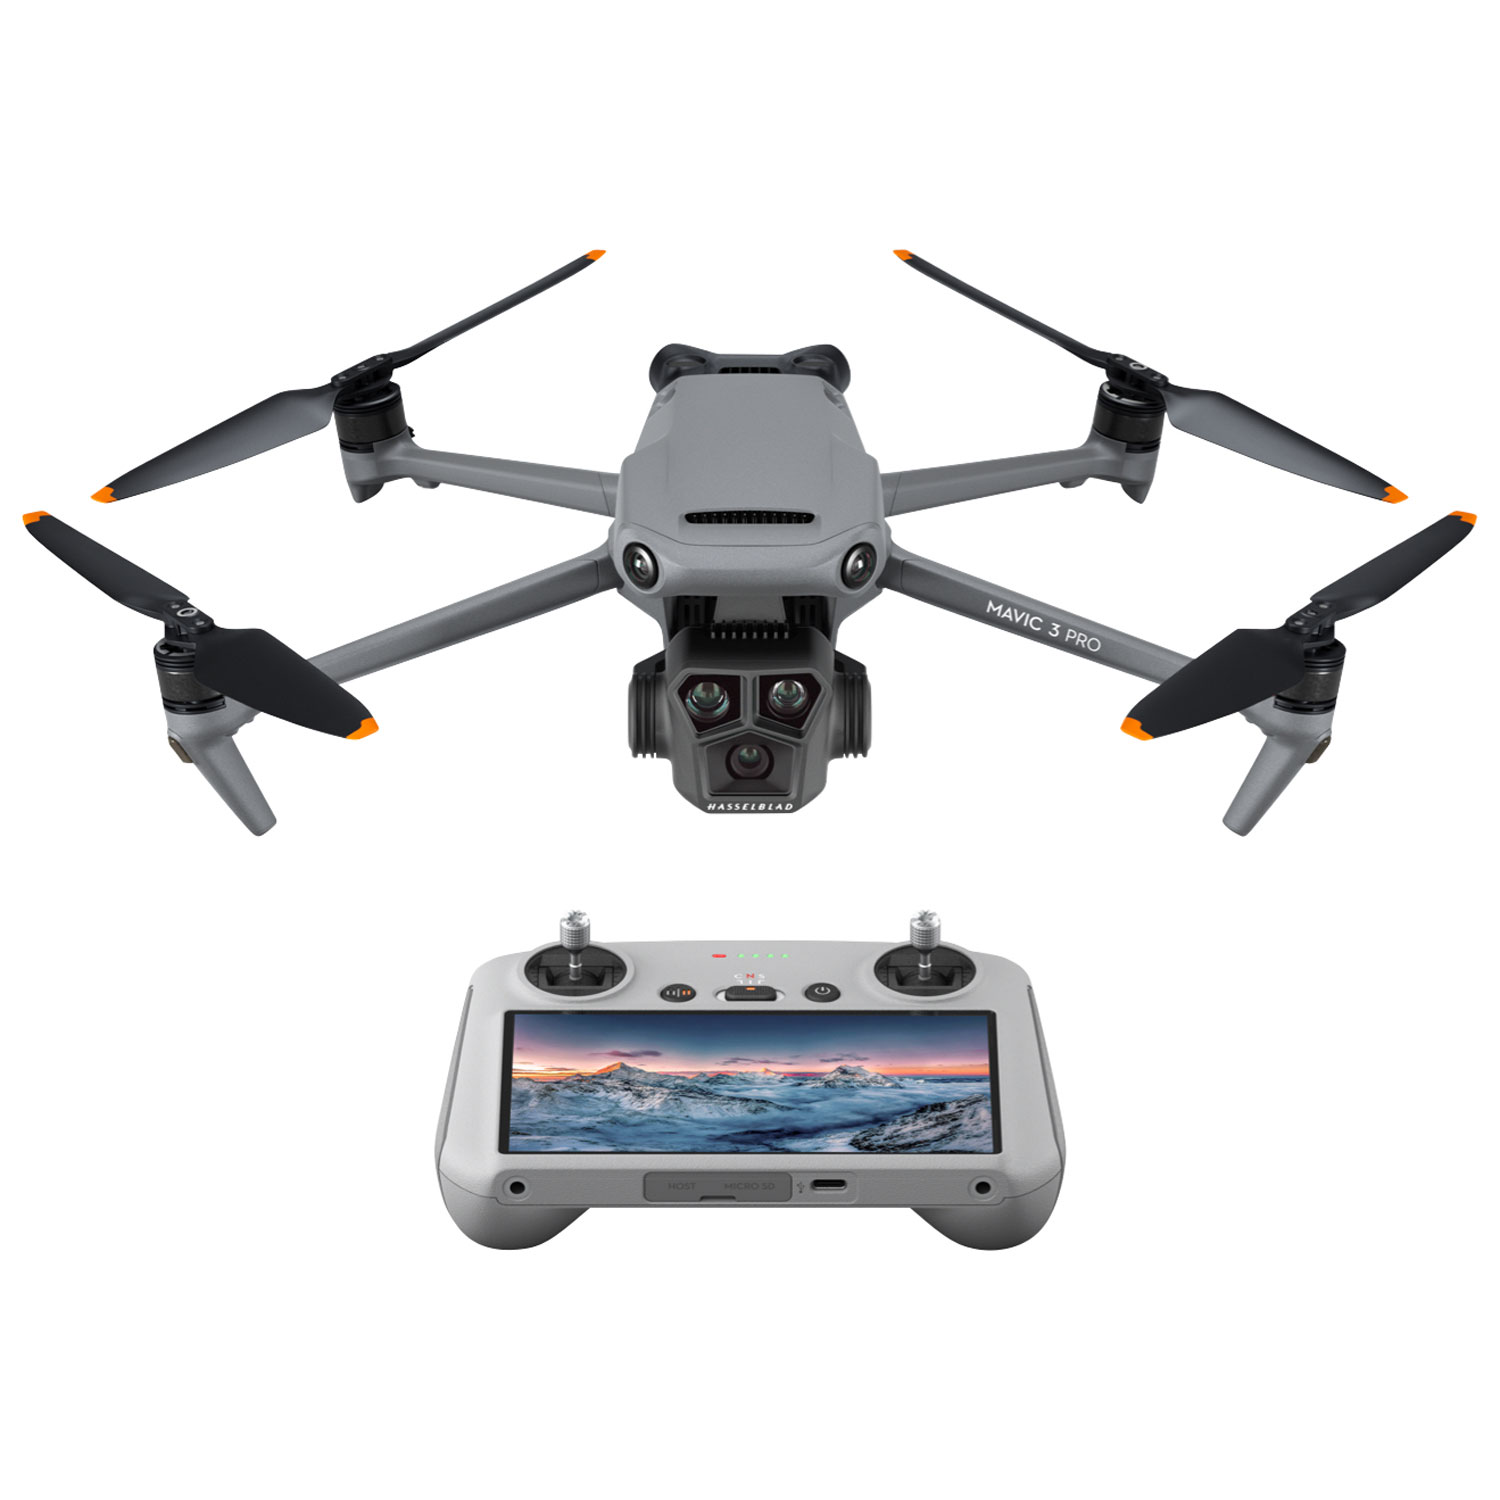 DJI Mavic 3 Pro Drone and Remote Control with Built-in Screen (DJI RC) – Gray